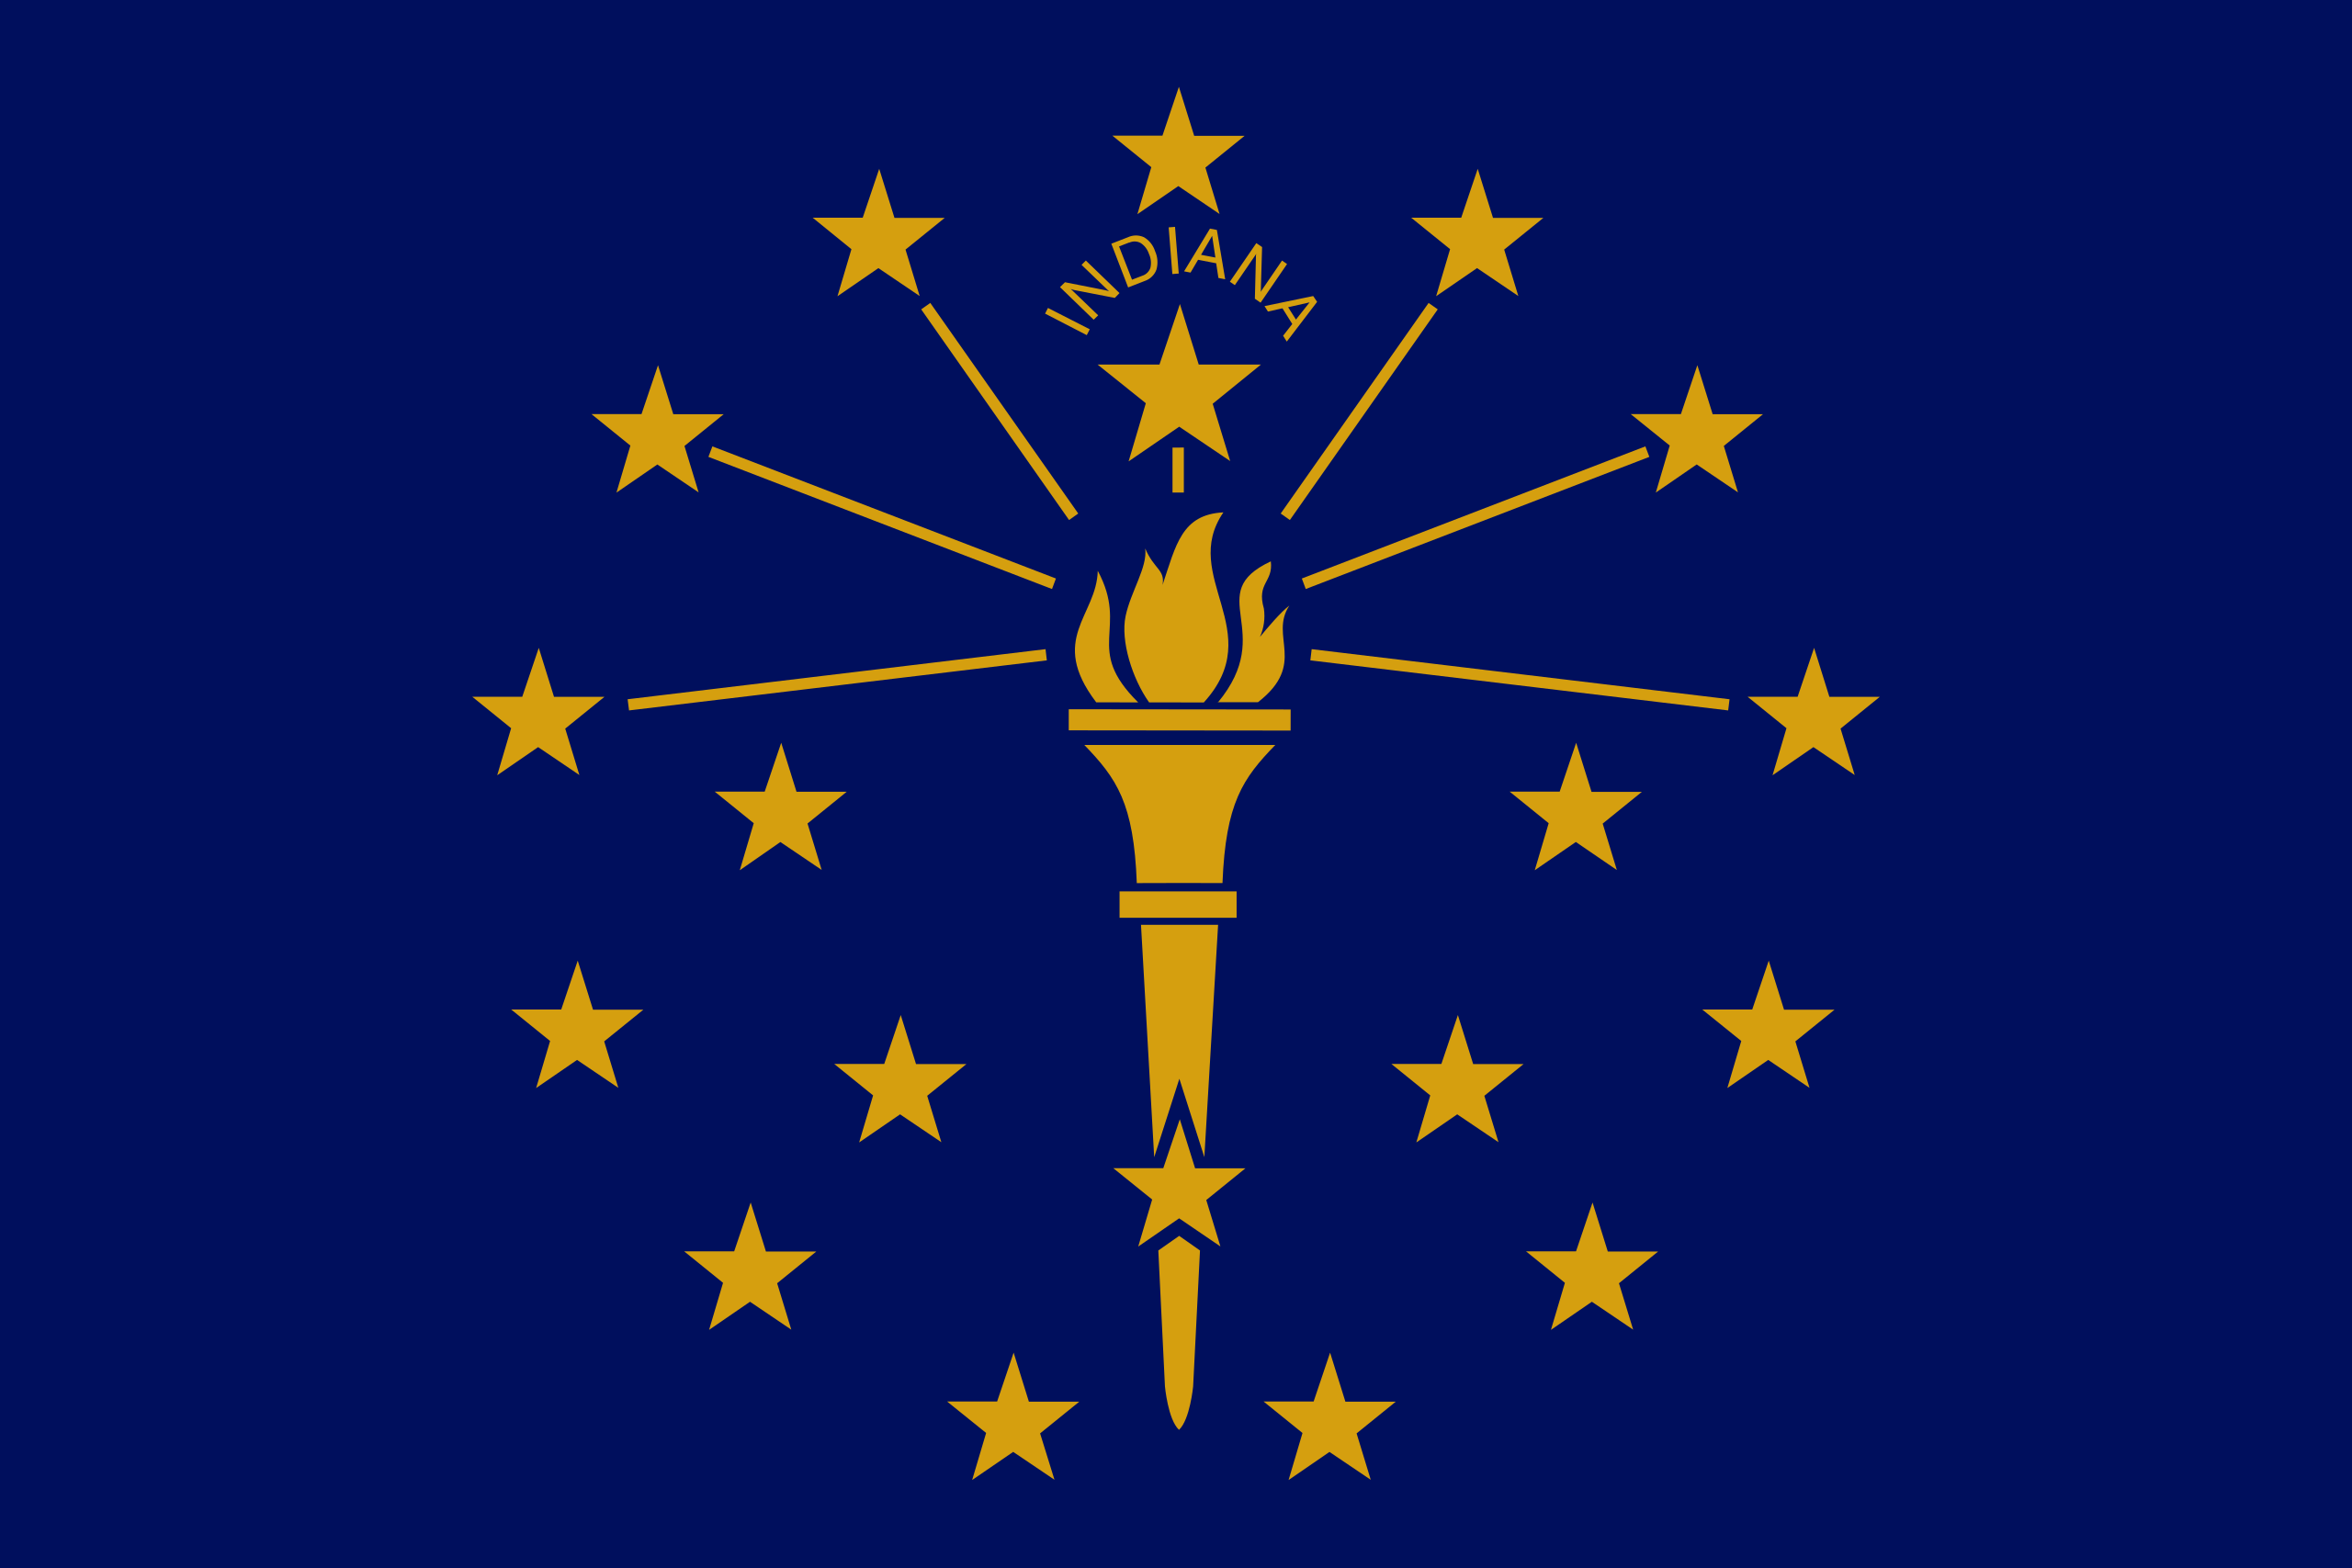 the State Flag of Indiana